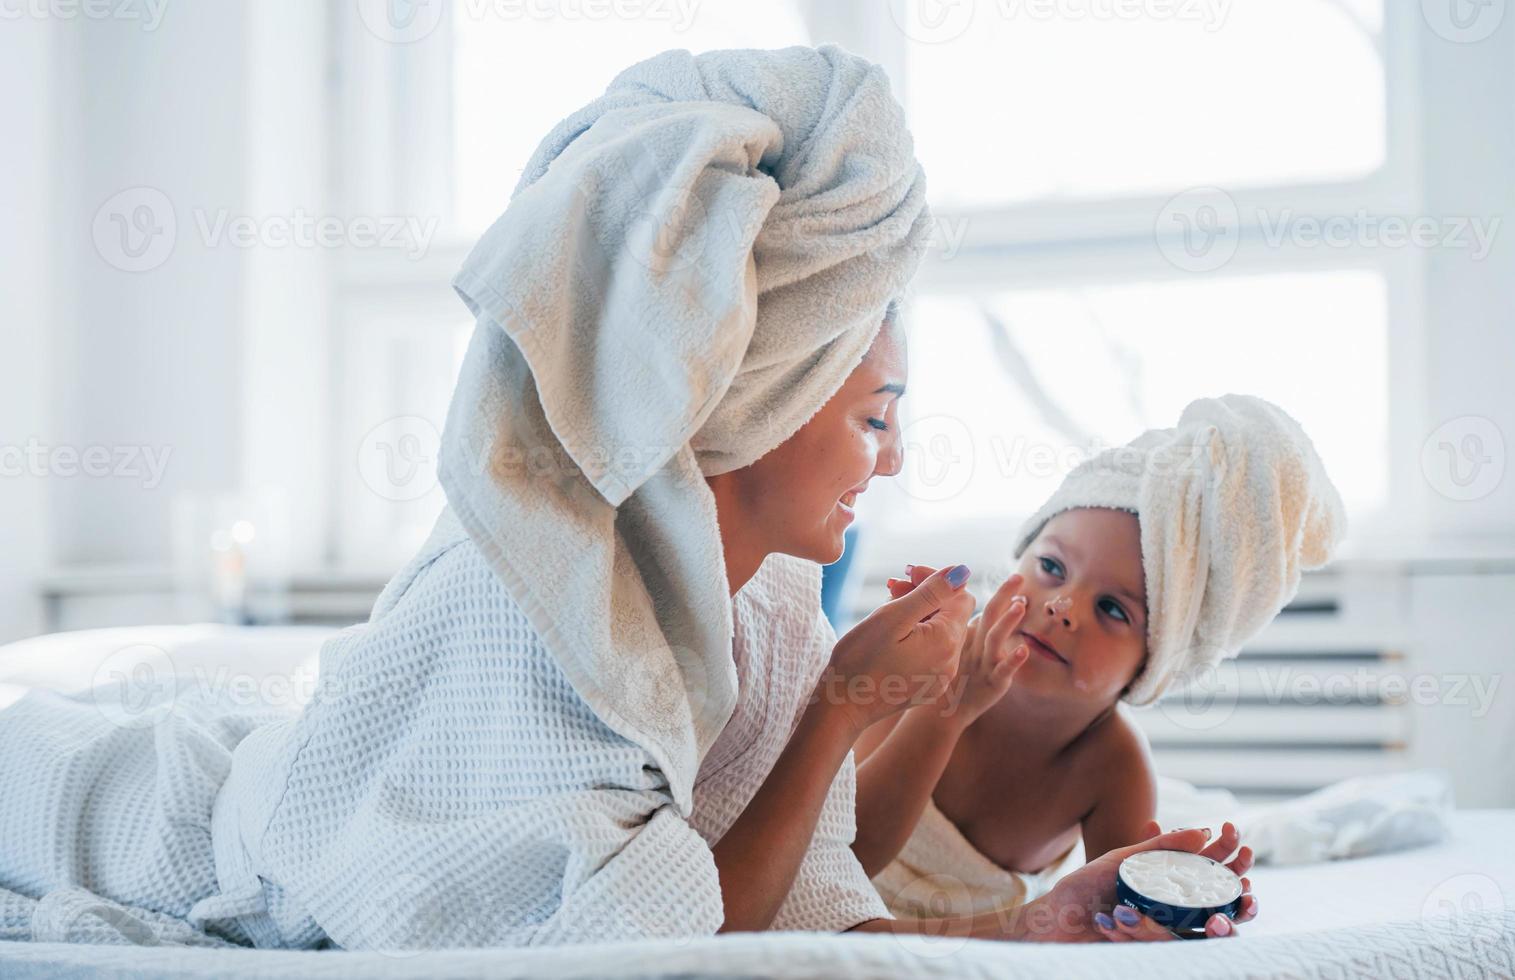 Using cream. Young mother with her daugher have beauty day indoors in white room photo